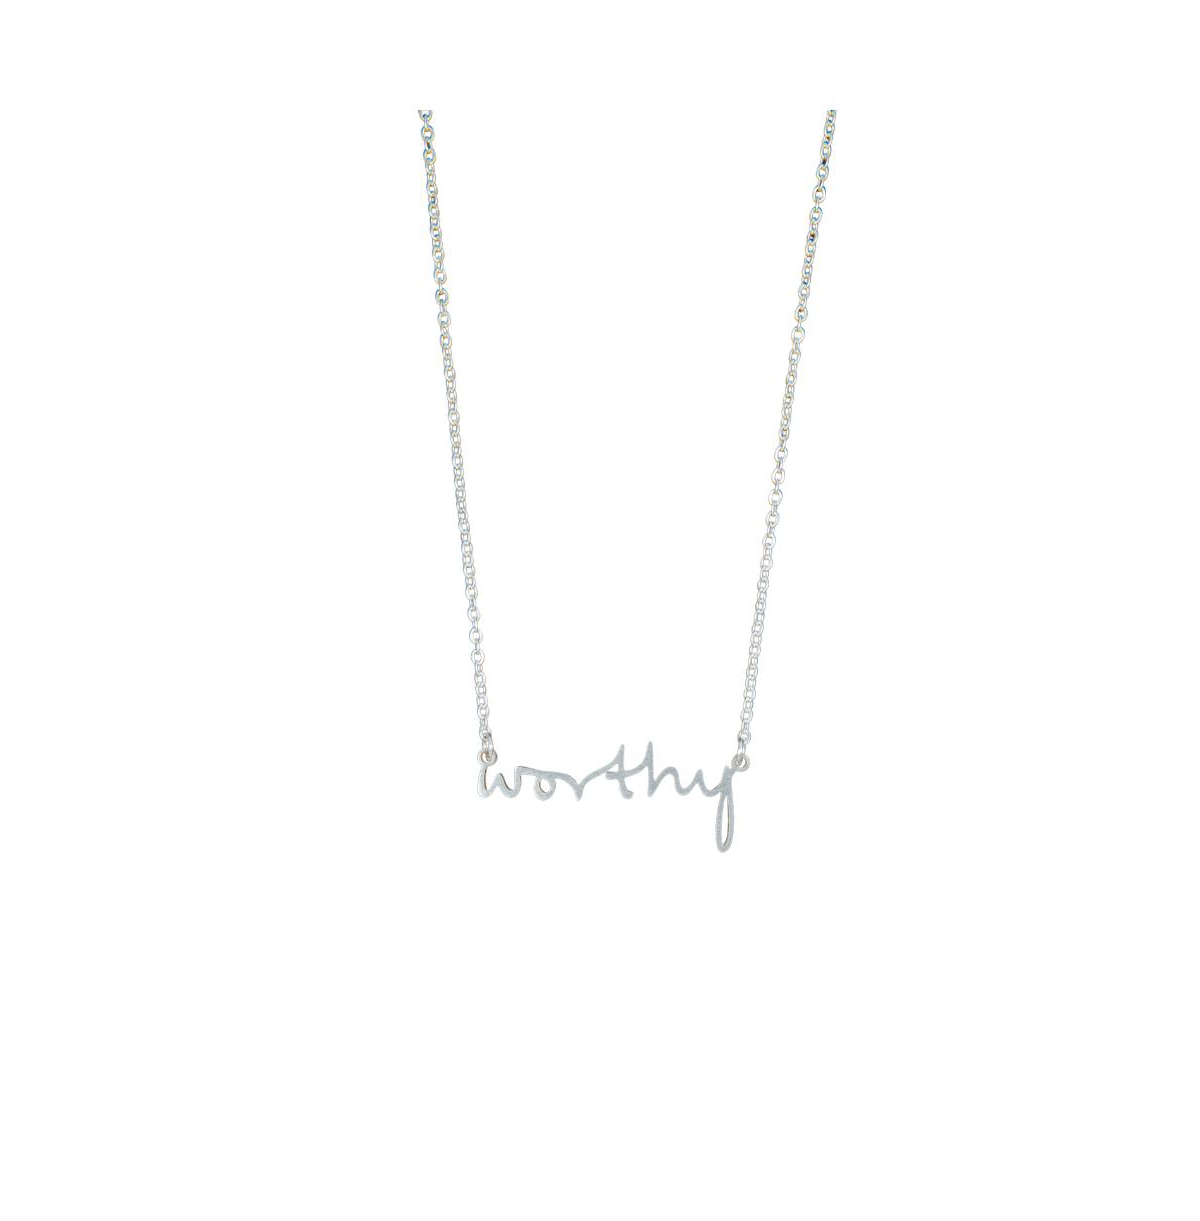 316L Absolute Affirmation Silver-Tone "Worthy" Necklace - Silver